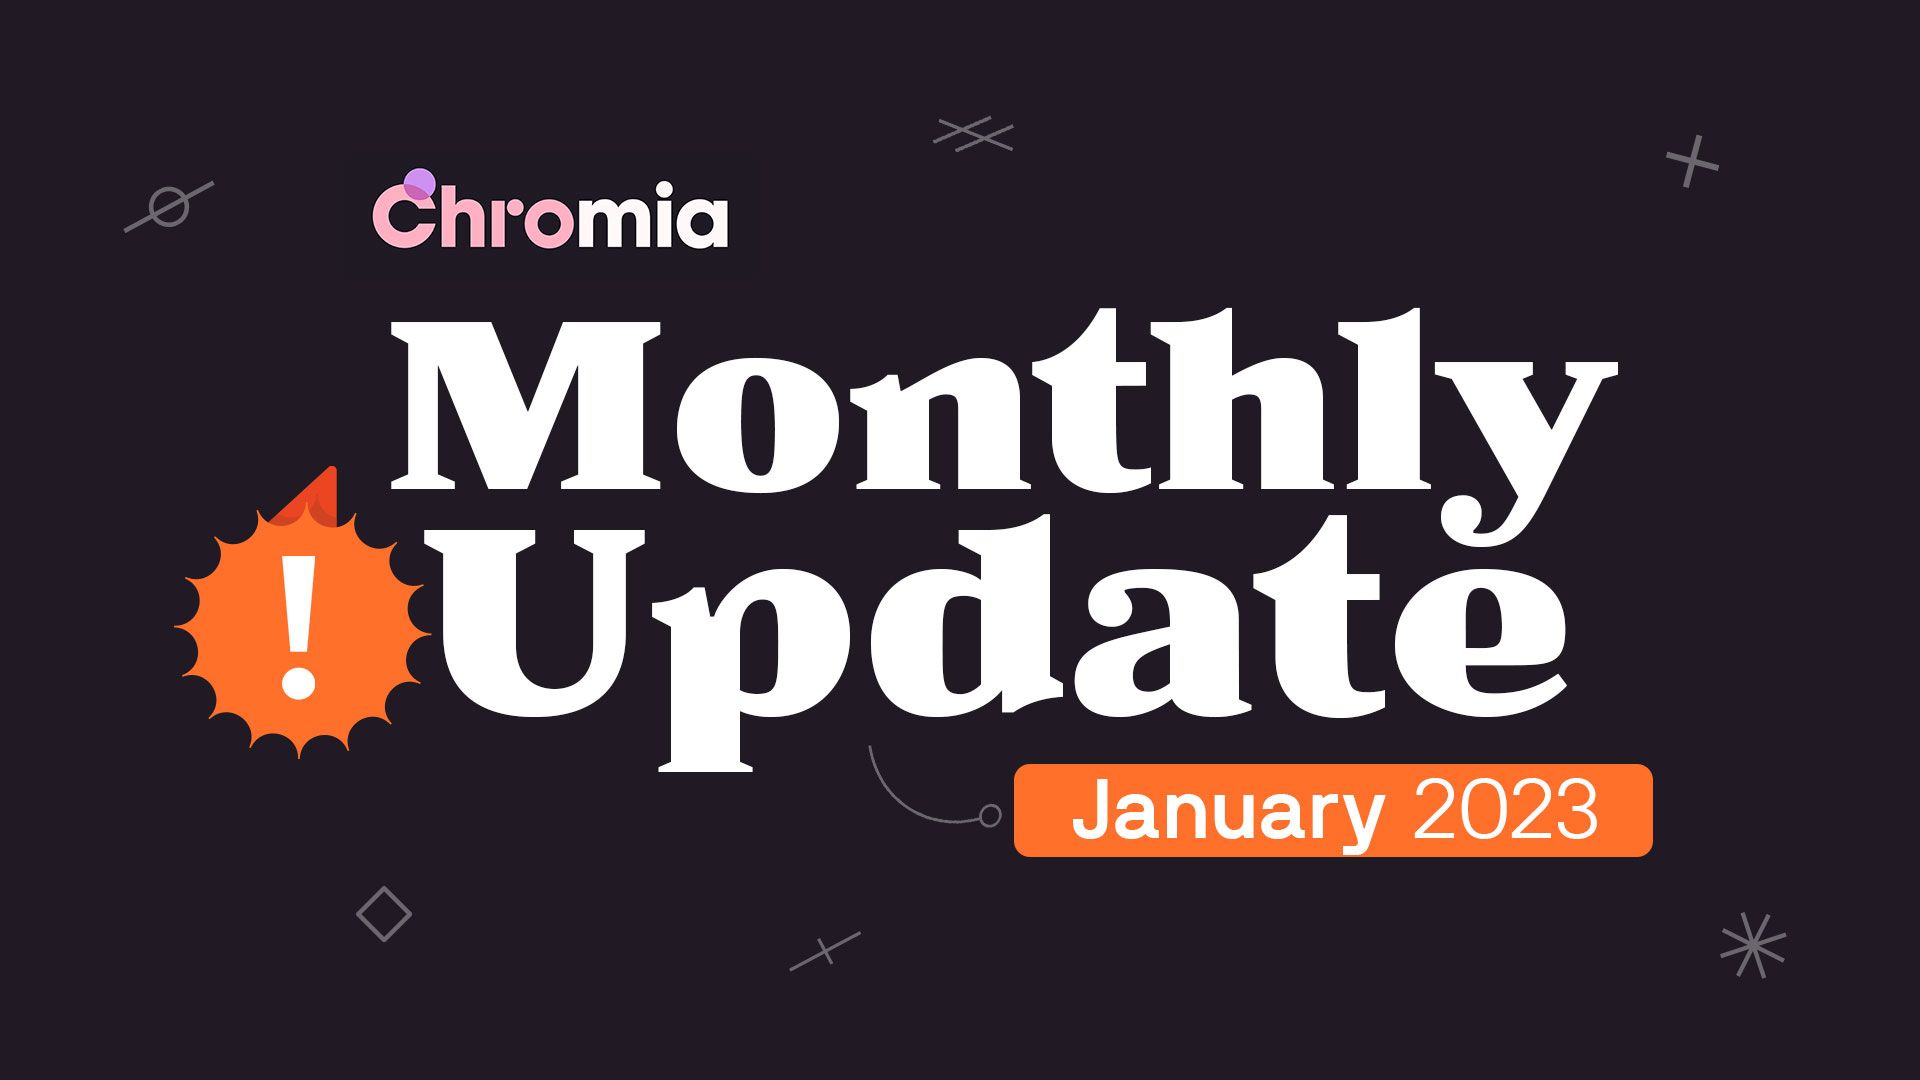 Chromia Monthly Update: January 2023